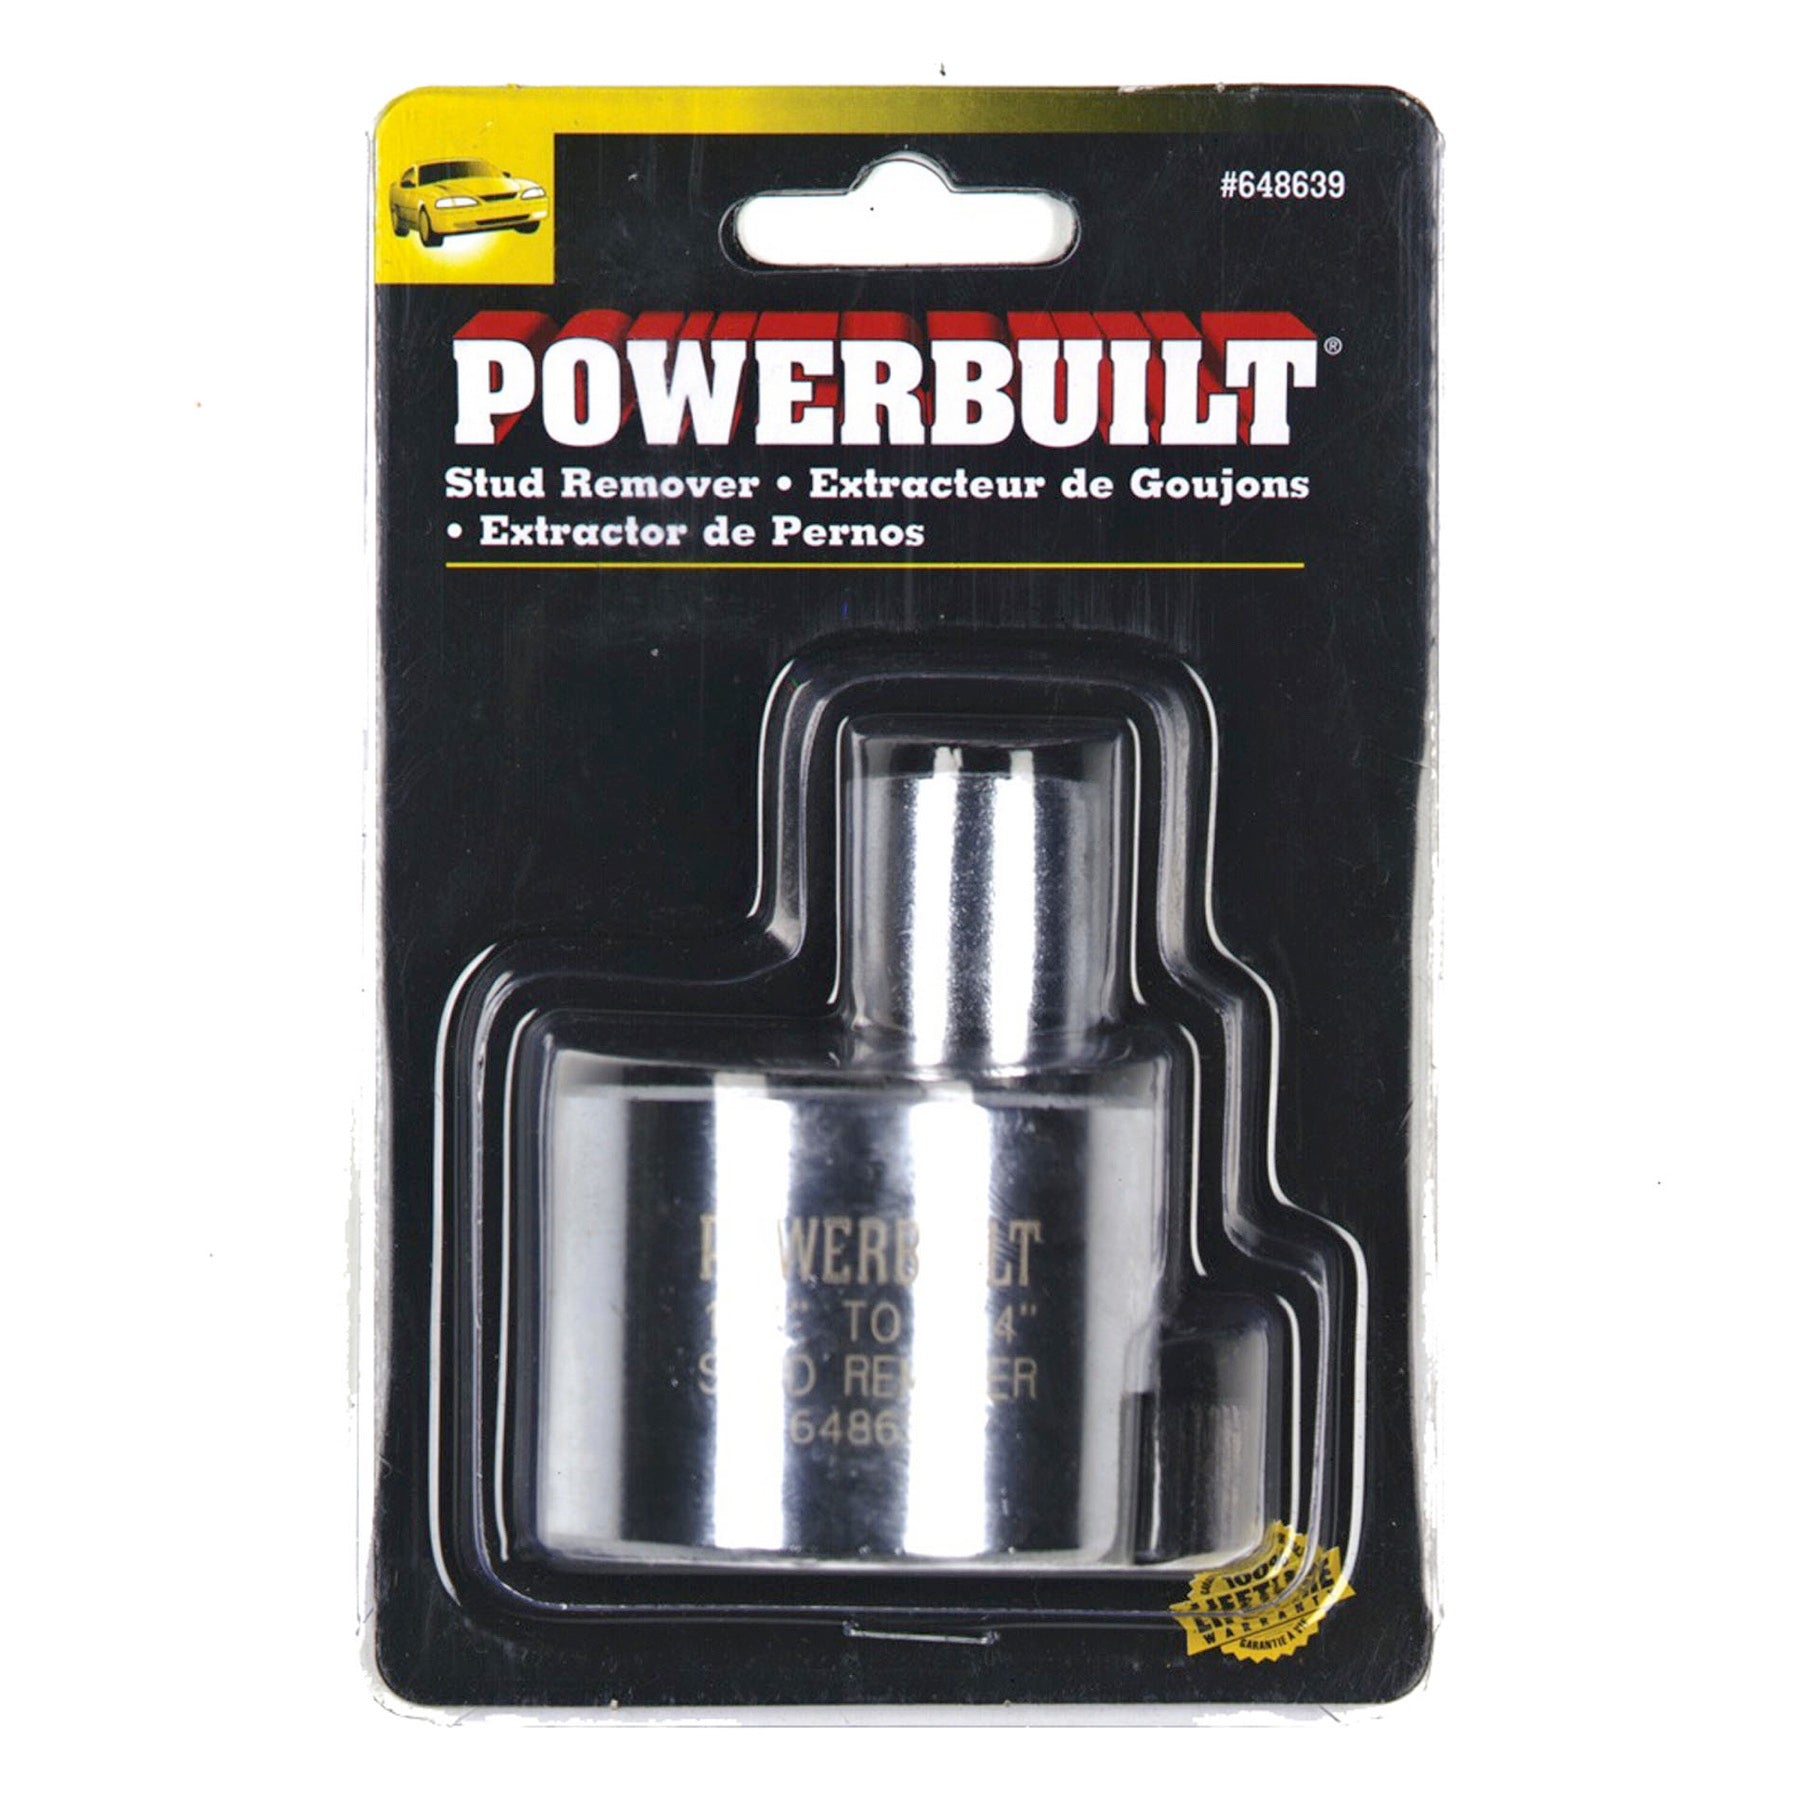 Powerbuilt Stud Remover 1/4-Inch to 3/4-Inch - 648639